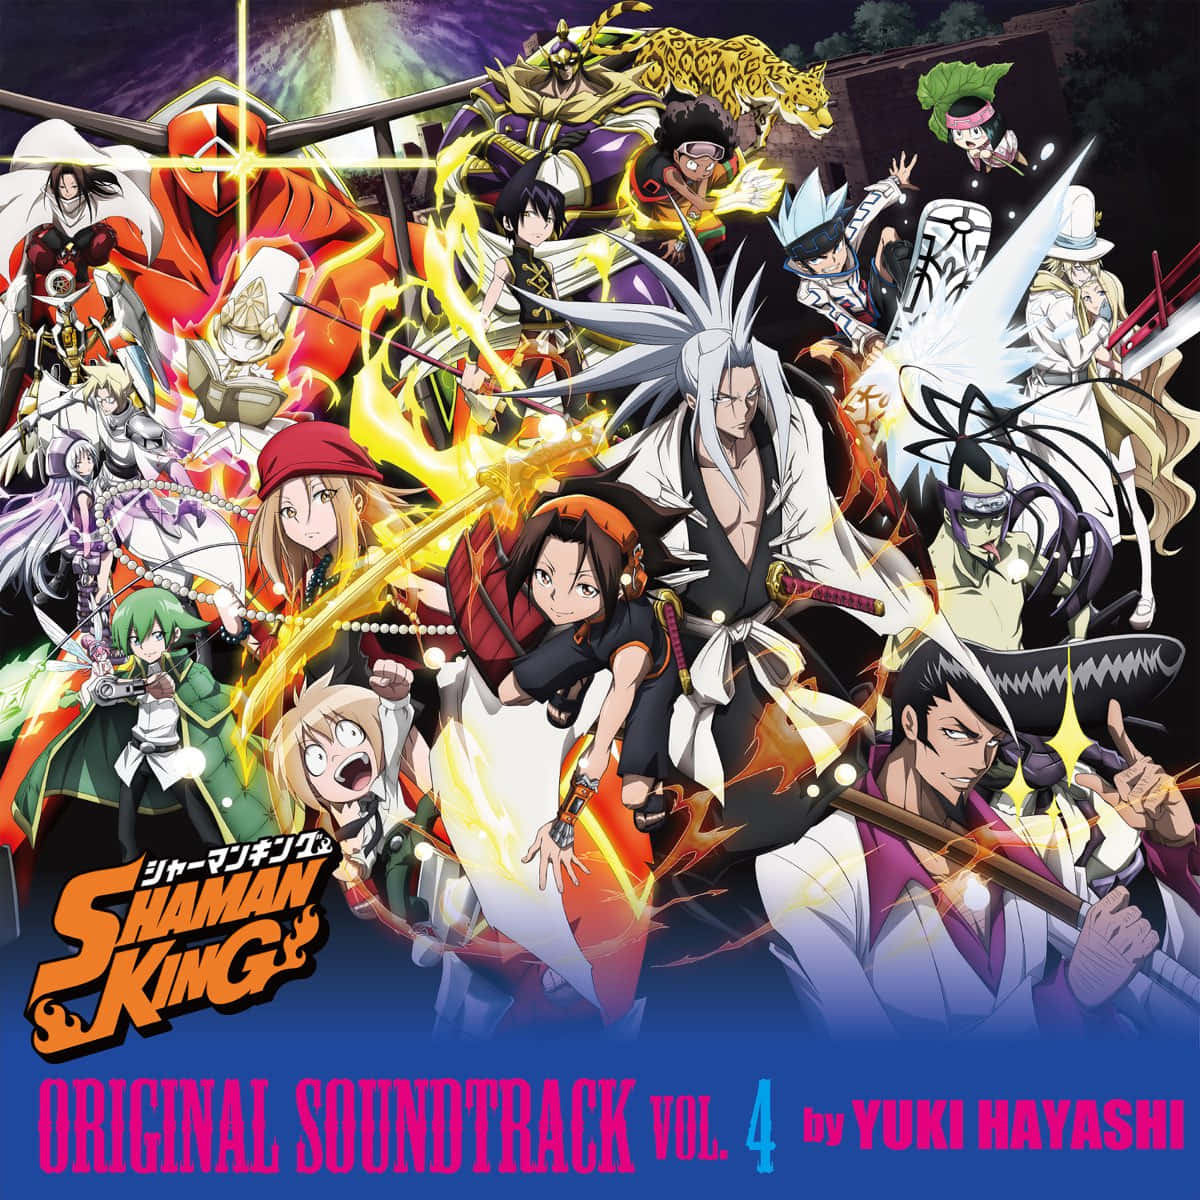 Join the Adventure with Shaman King